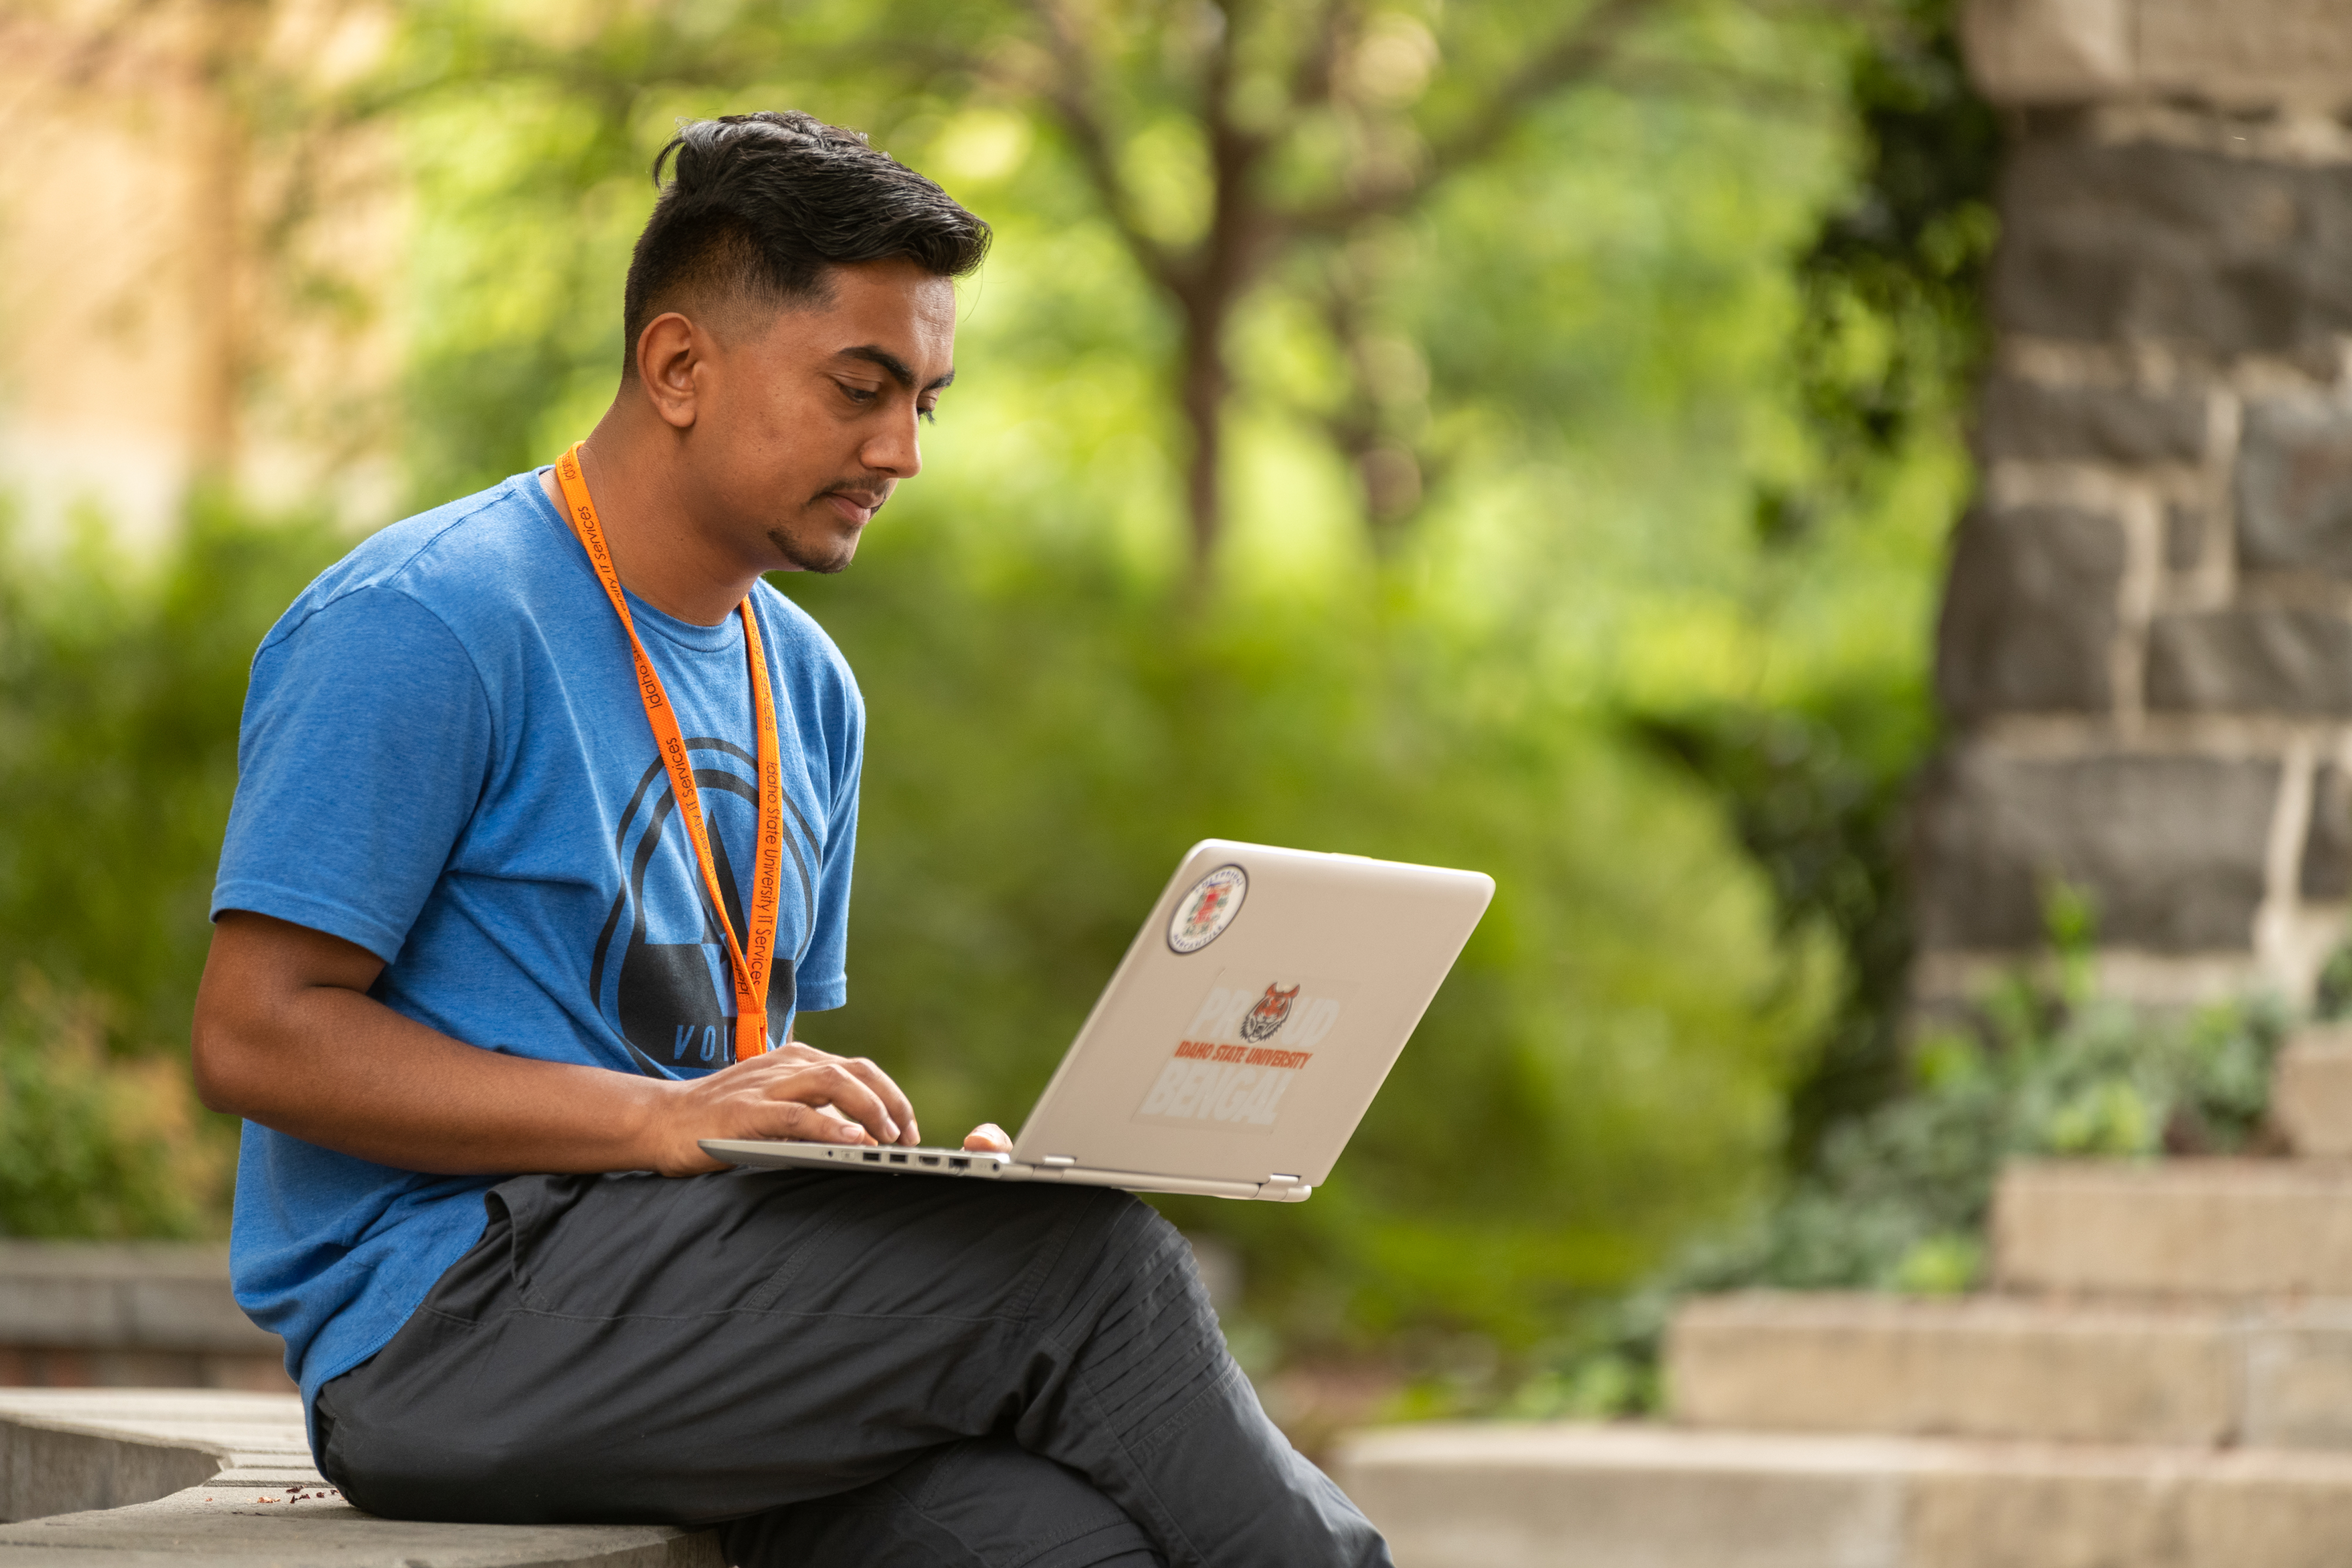 Student using a laptop outdoors.